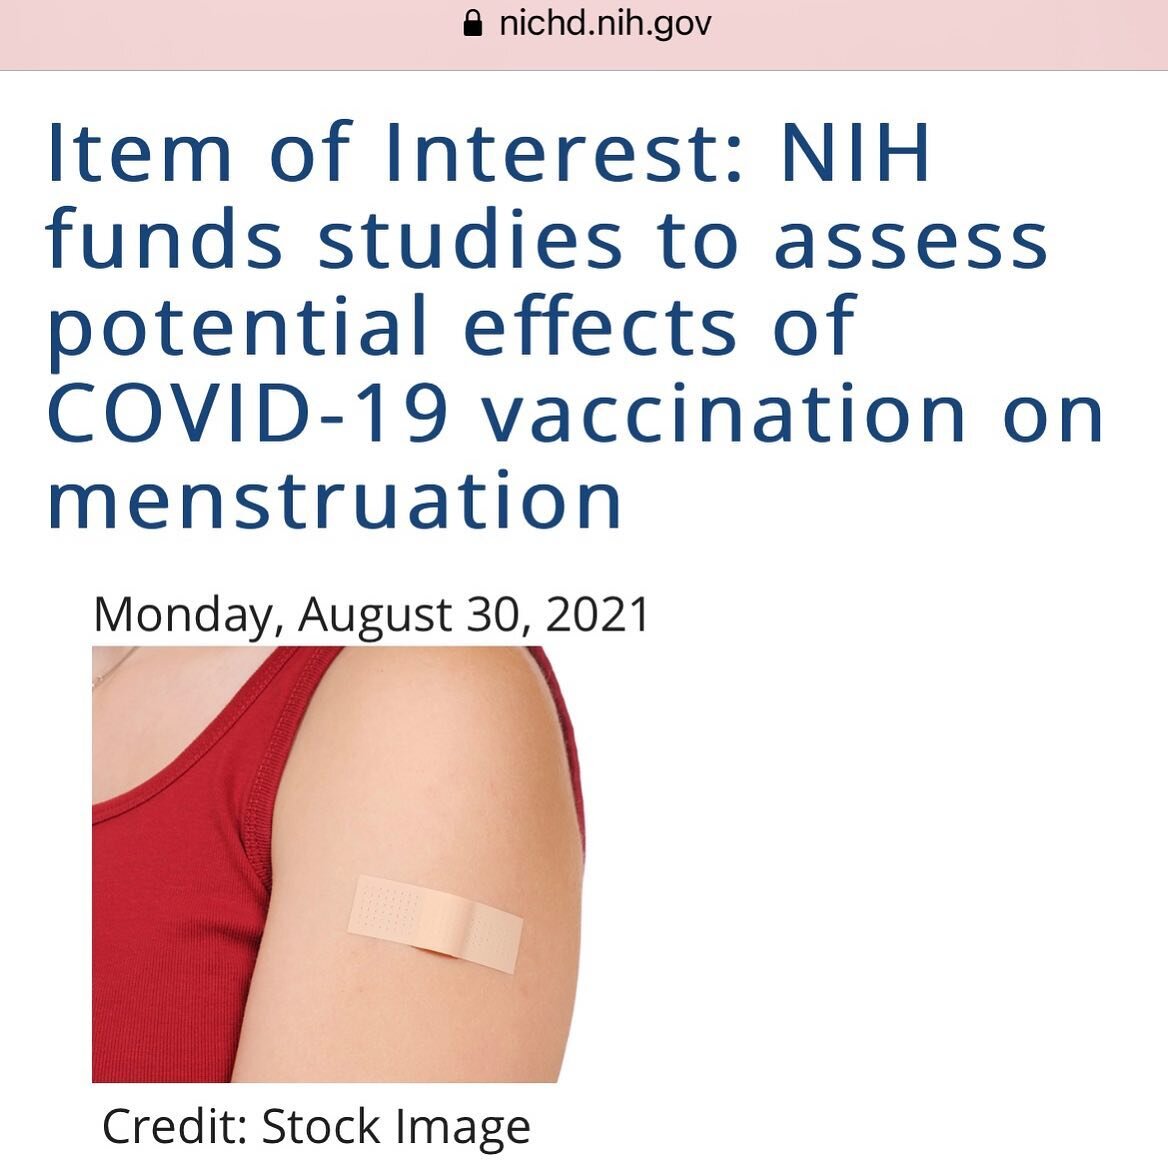 In the US the NIH (National Institute of Health) will be funding studies on the impact of COVID-19 vaccines on women&rsquo;s menstrual cycles. Which ultimately translates to effects on fertility. While I think it&rsquo;s a great start, the wording in